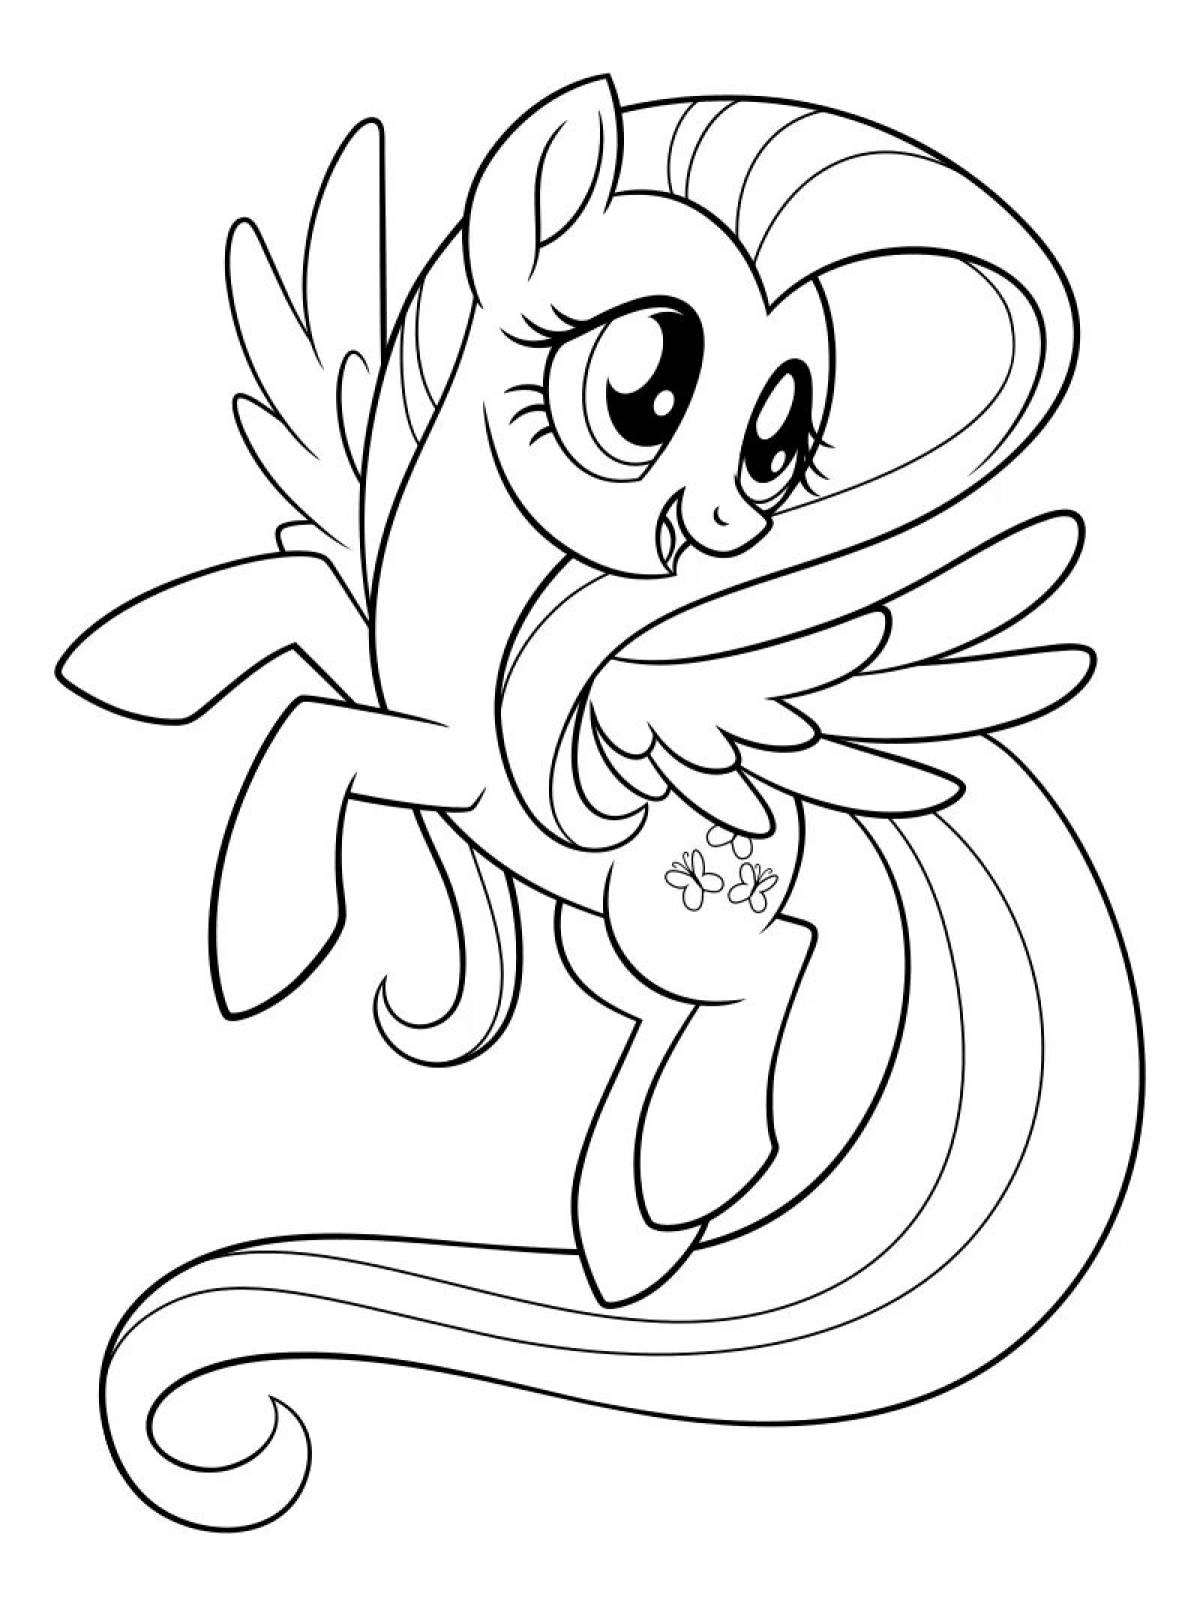 Coloring lively moo little pony